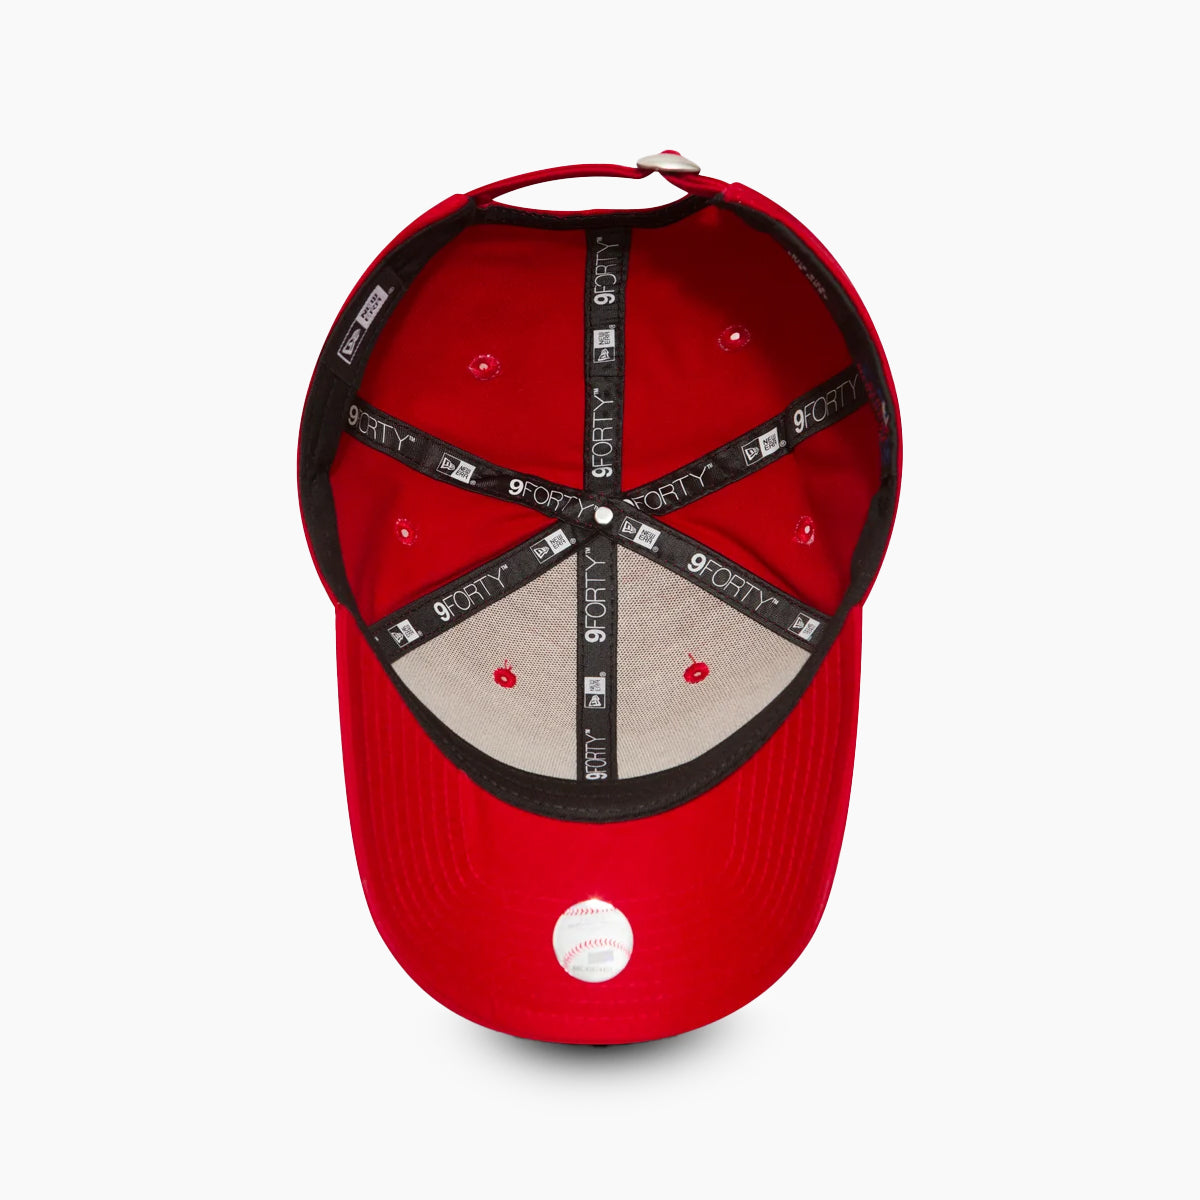 New Era 940 Leag Basic NeyYan-10531938-Red-One Size-SUEDE Store